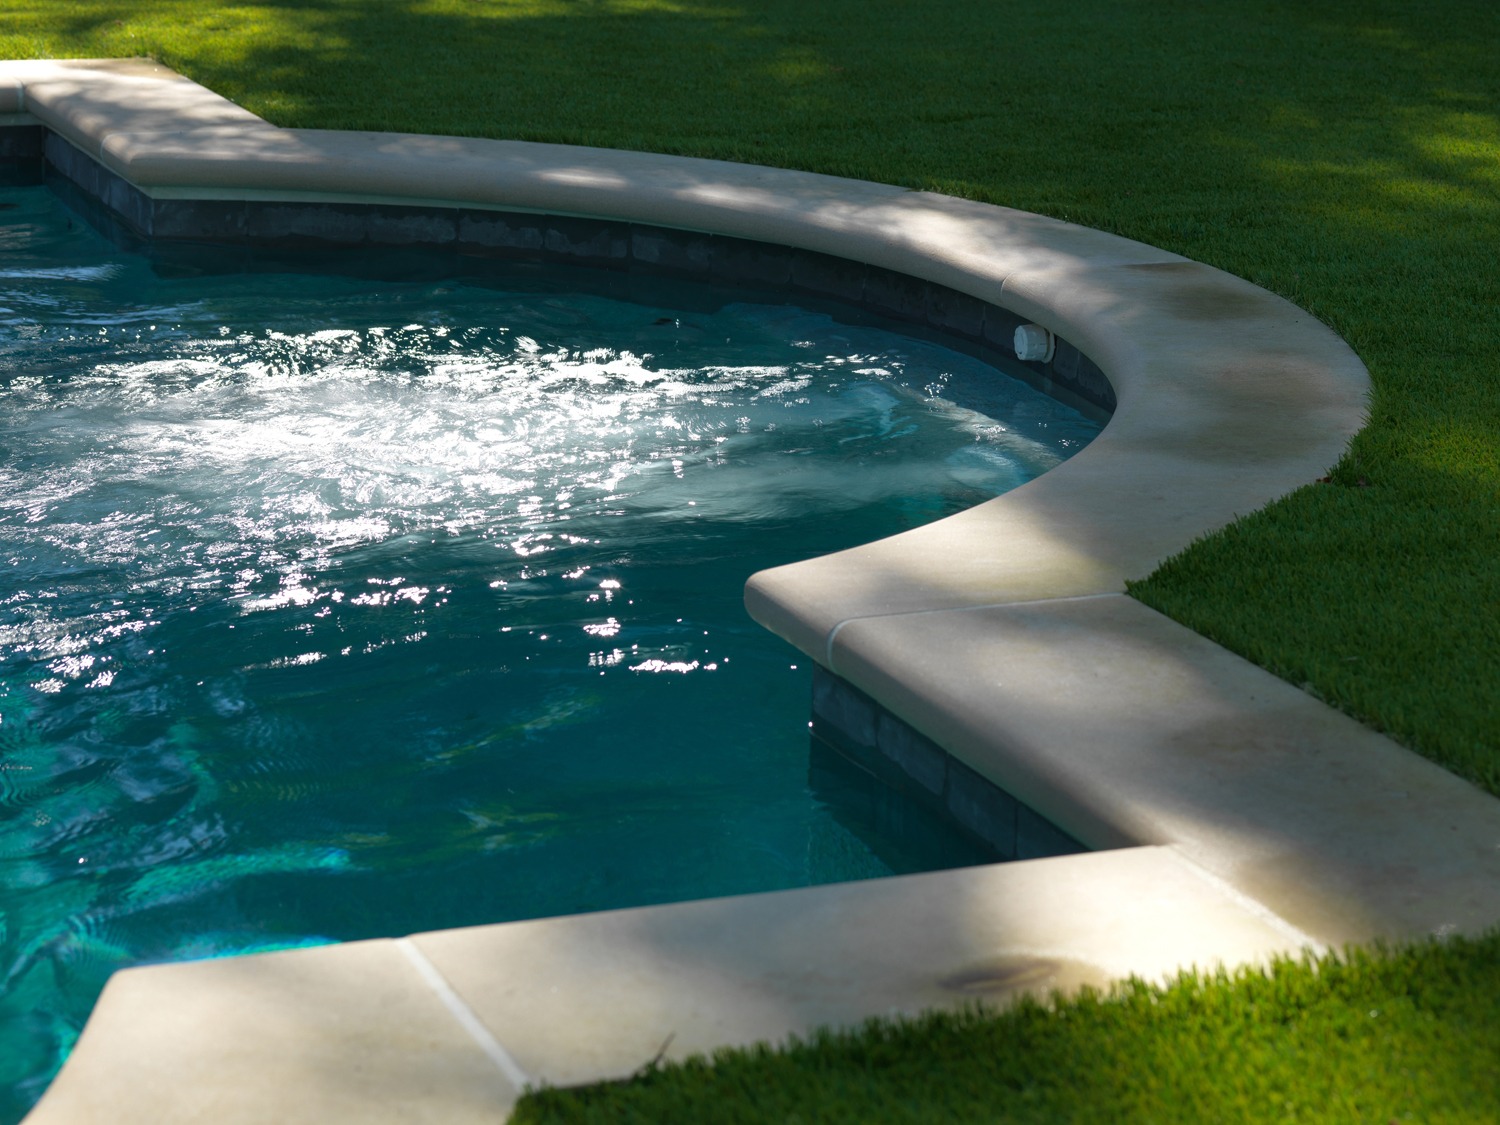 An outdoor swimming pool with sparkling water is surrounded by a curved, sunlit patio and neatly trimmed grass, suggestive of a tranquil backyard setting.